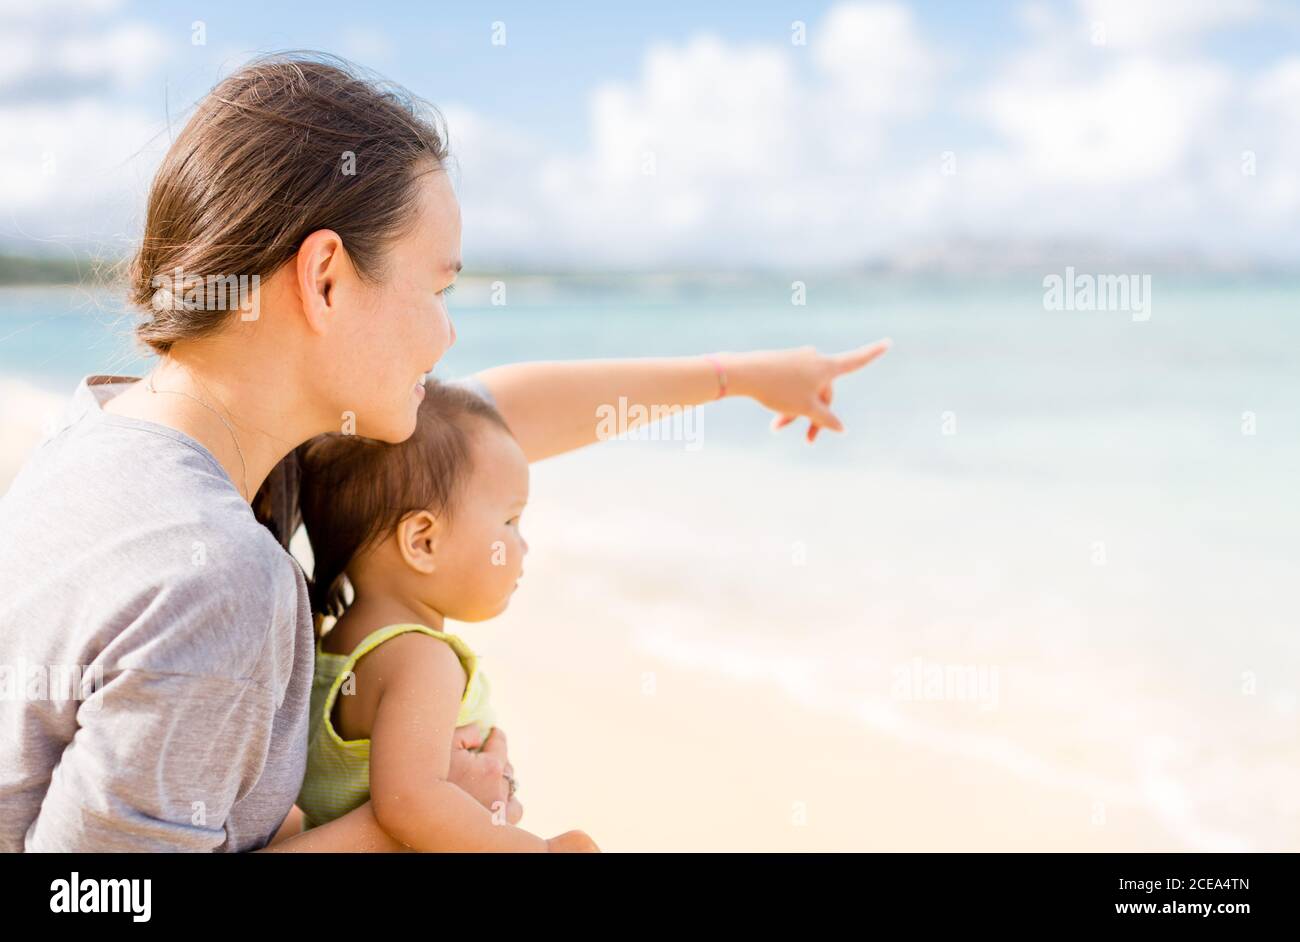 Mother and daughter family bonding on beautiful tropical beach during summer holiday vacation. Parent pointing out to the view showing her baby girl. Stock Photo